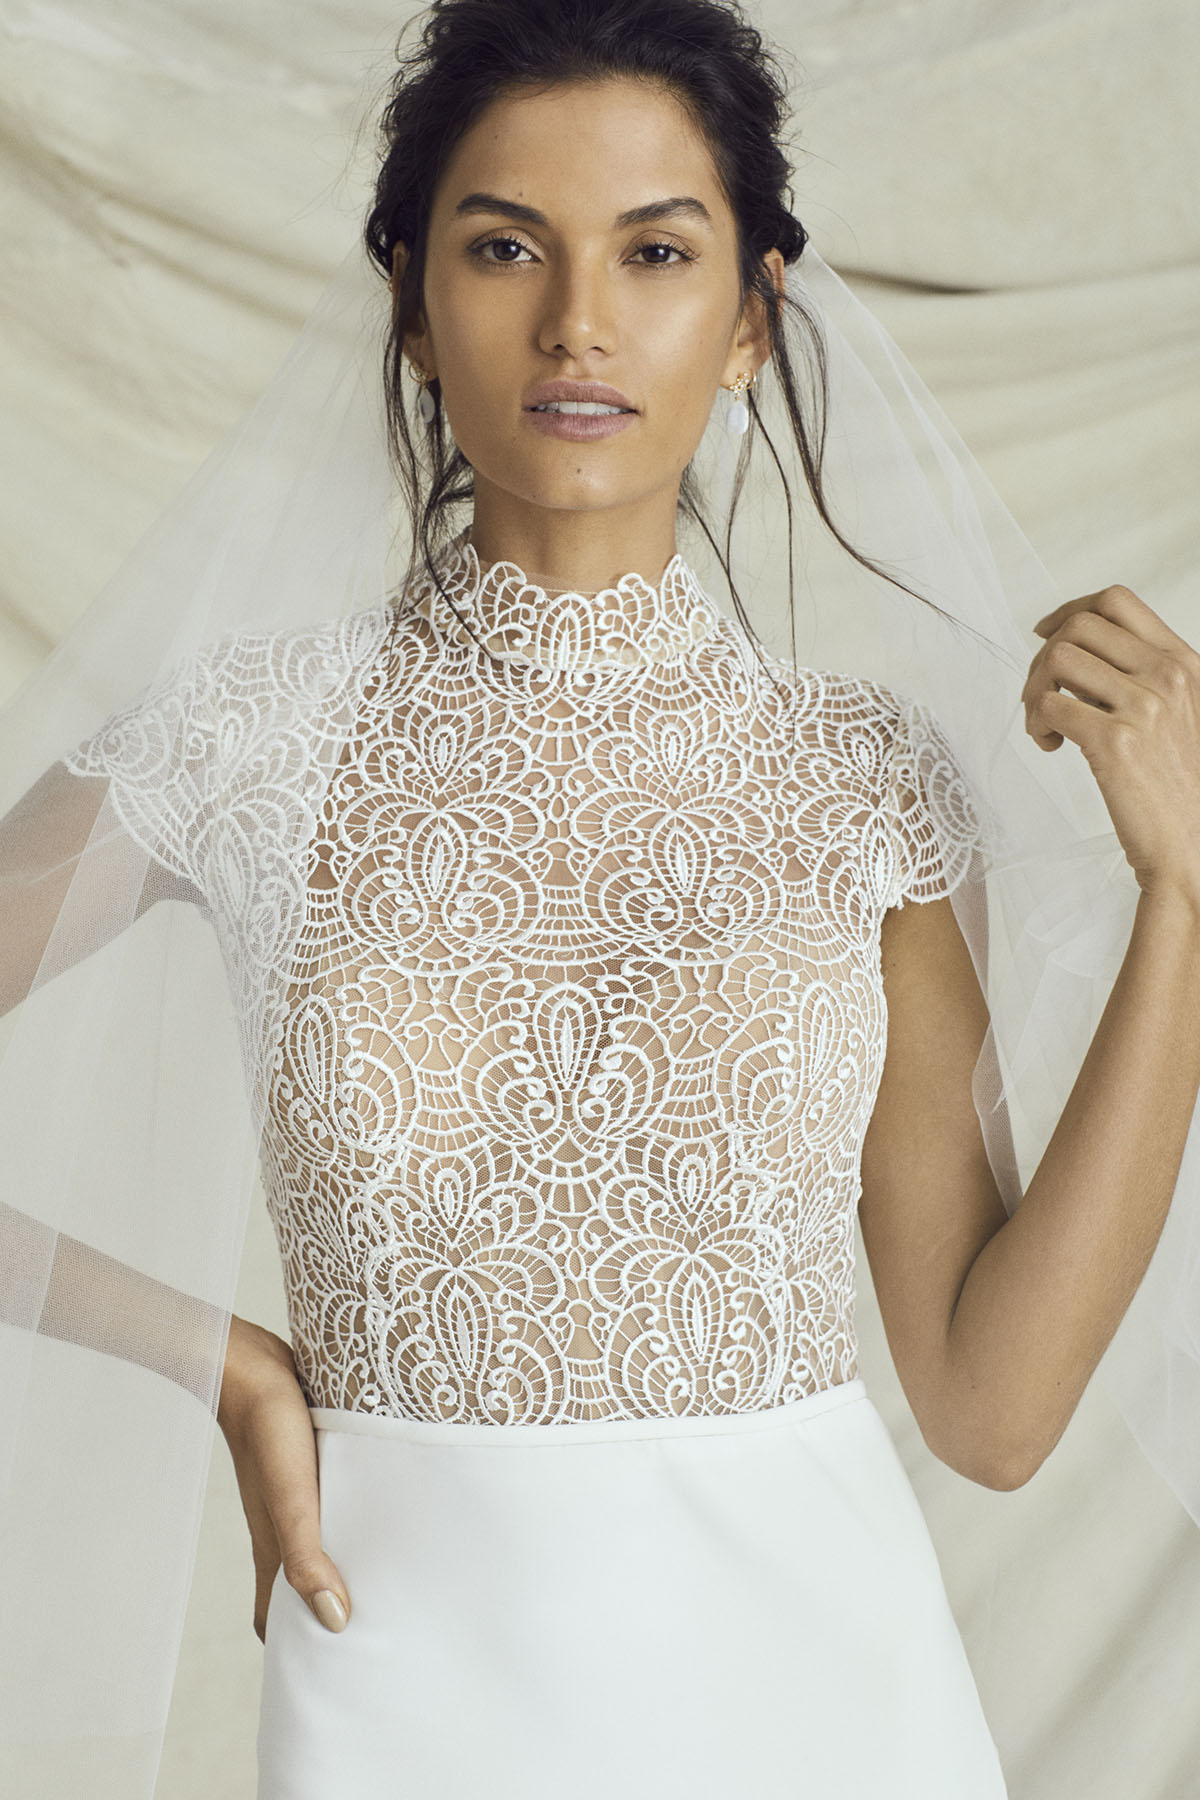 The wow factor of Kelly Faetanini wedding dresses lace see through top eyelet dress Adair